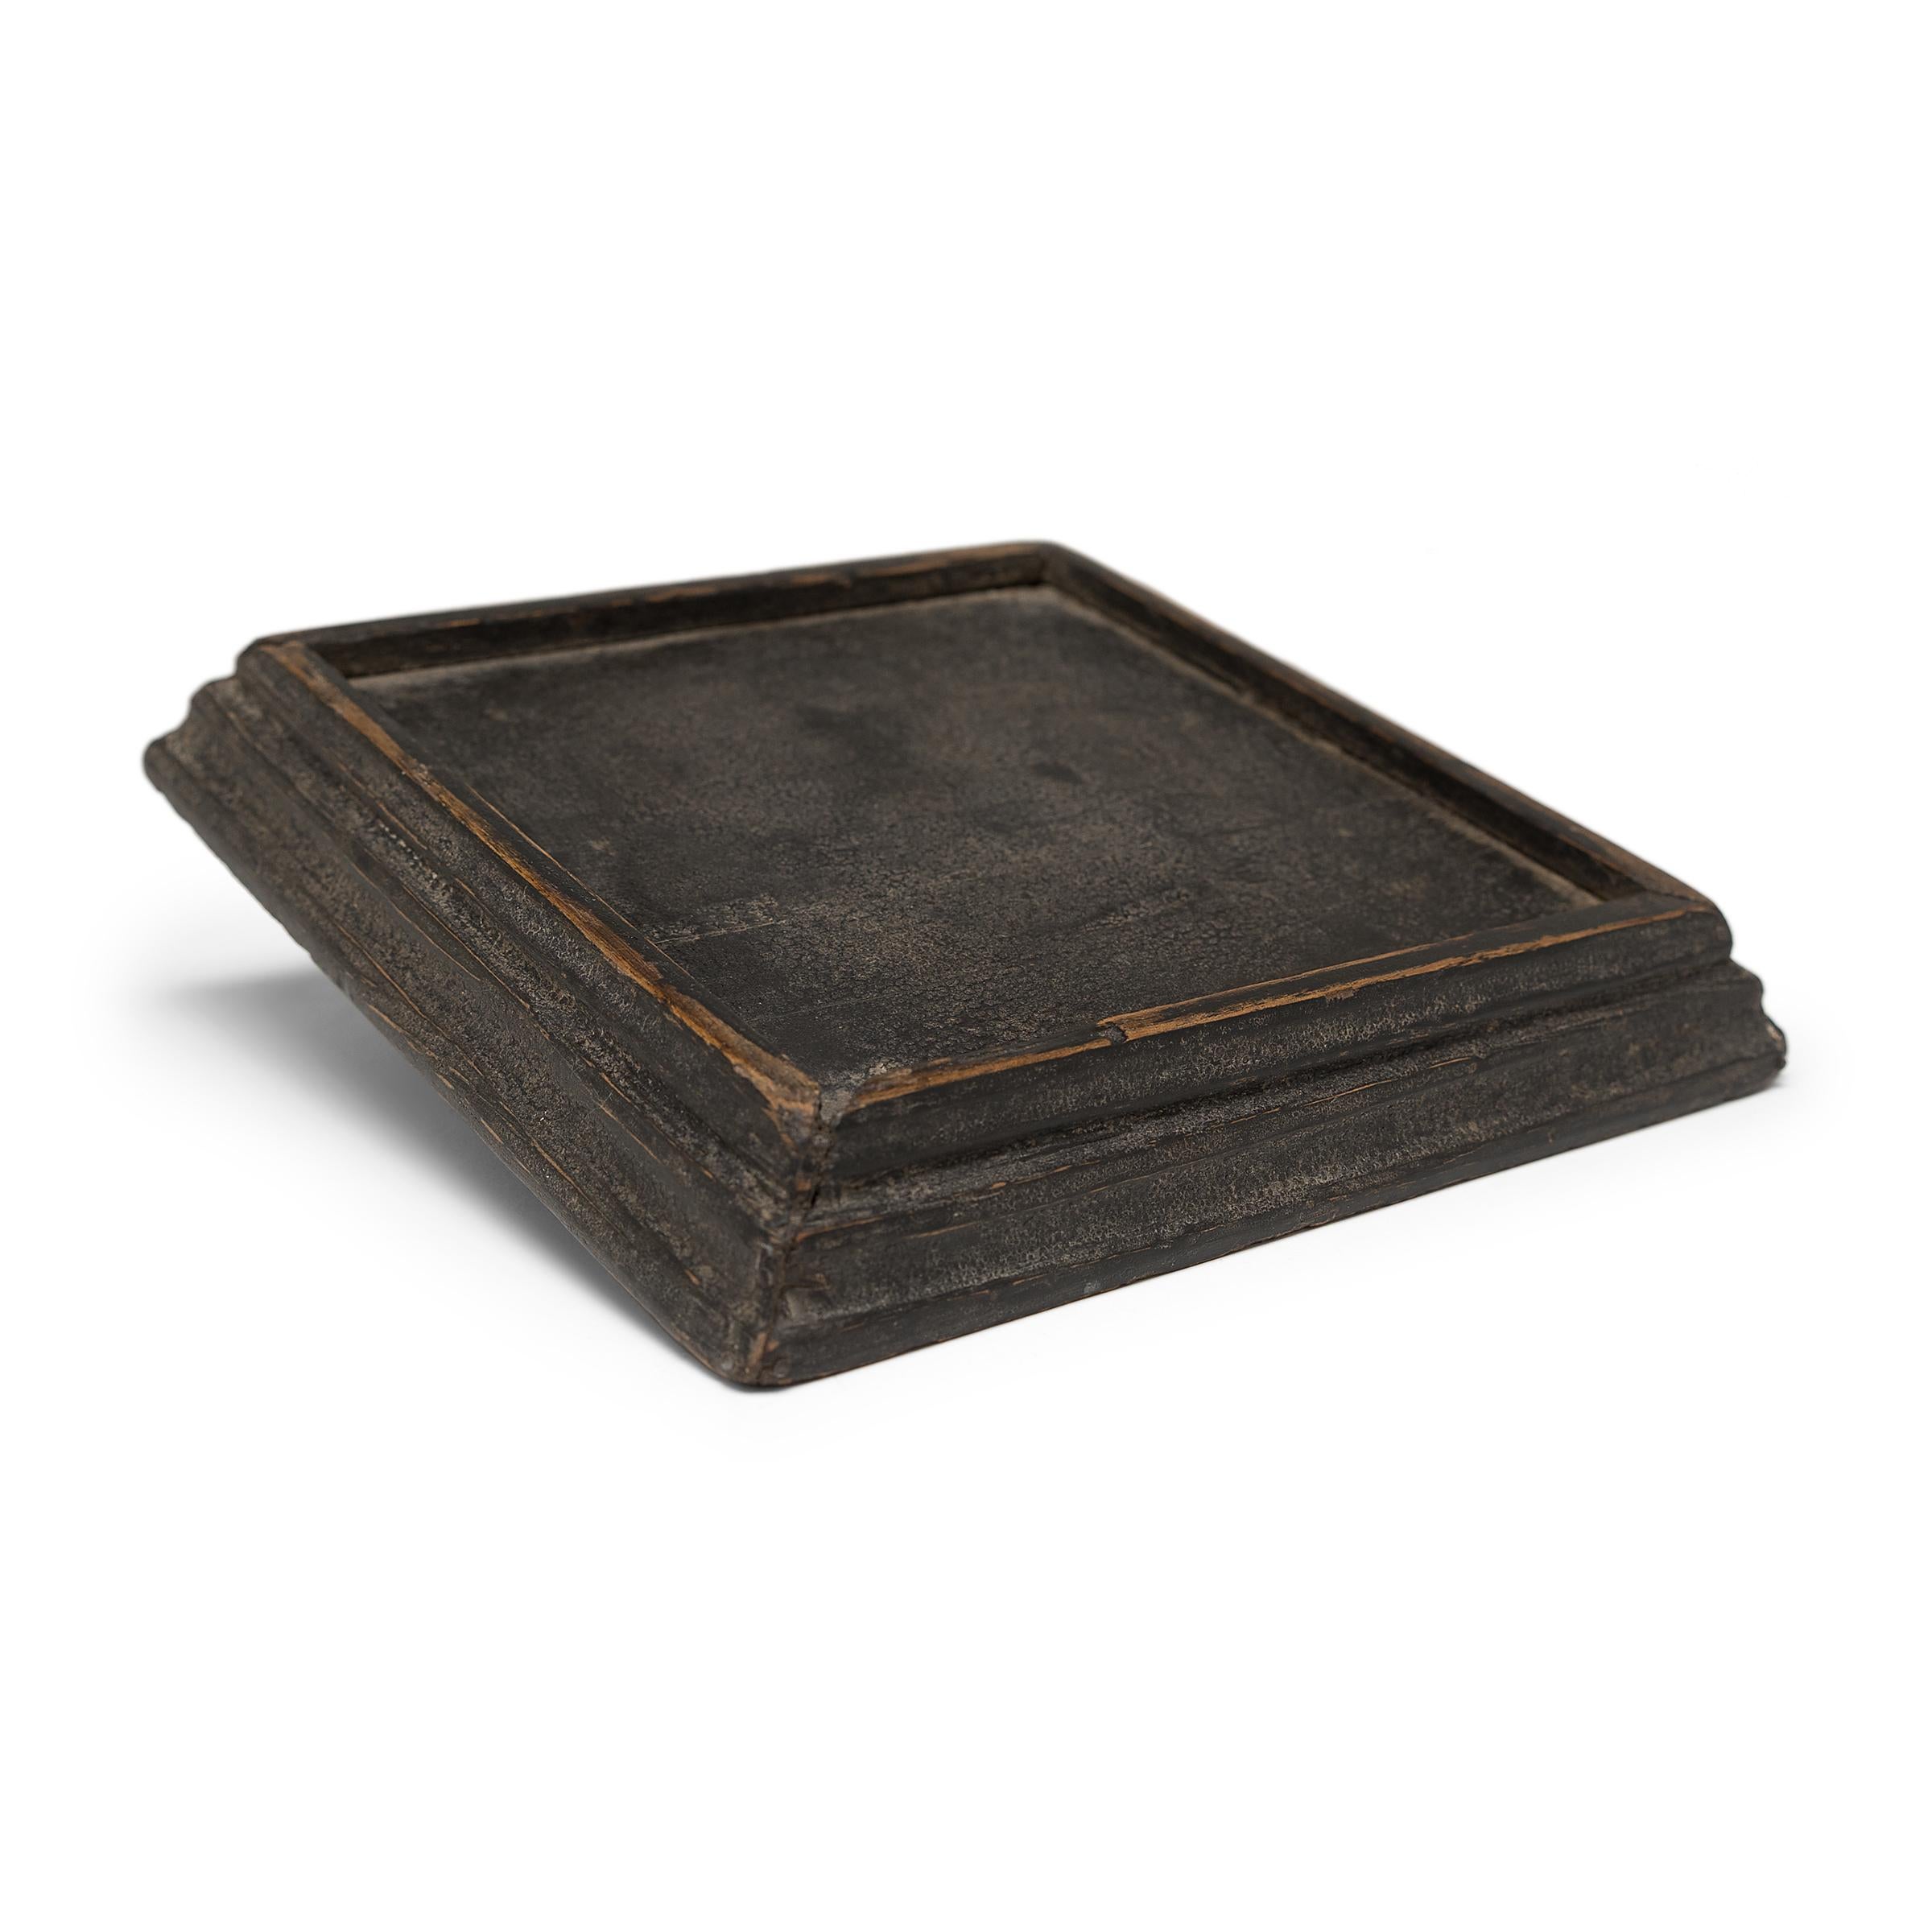 Simple lines, a modest form, and a layer of hand-brushed lacquer give this petite Qing-dynasty tray a provincial charm that recalls the warmth of home. The smoky brown lacquer finish has weathered with time to reveal the light brown coloring of its